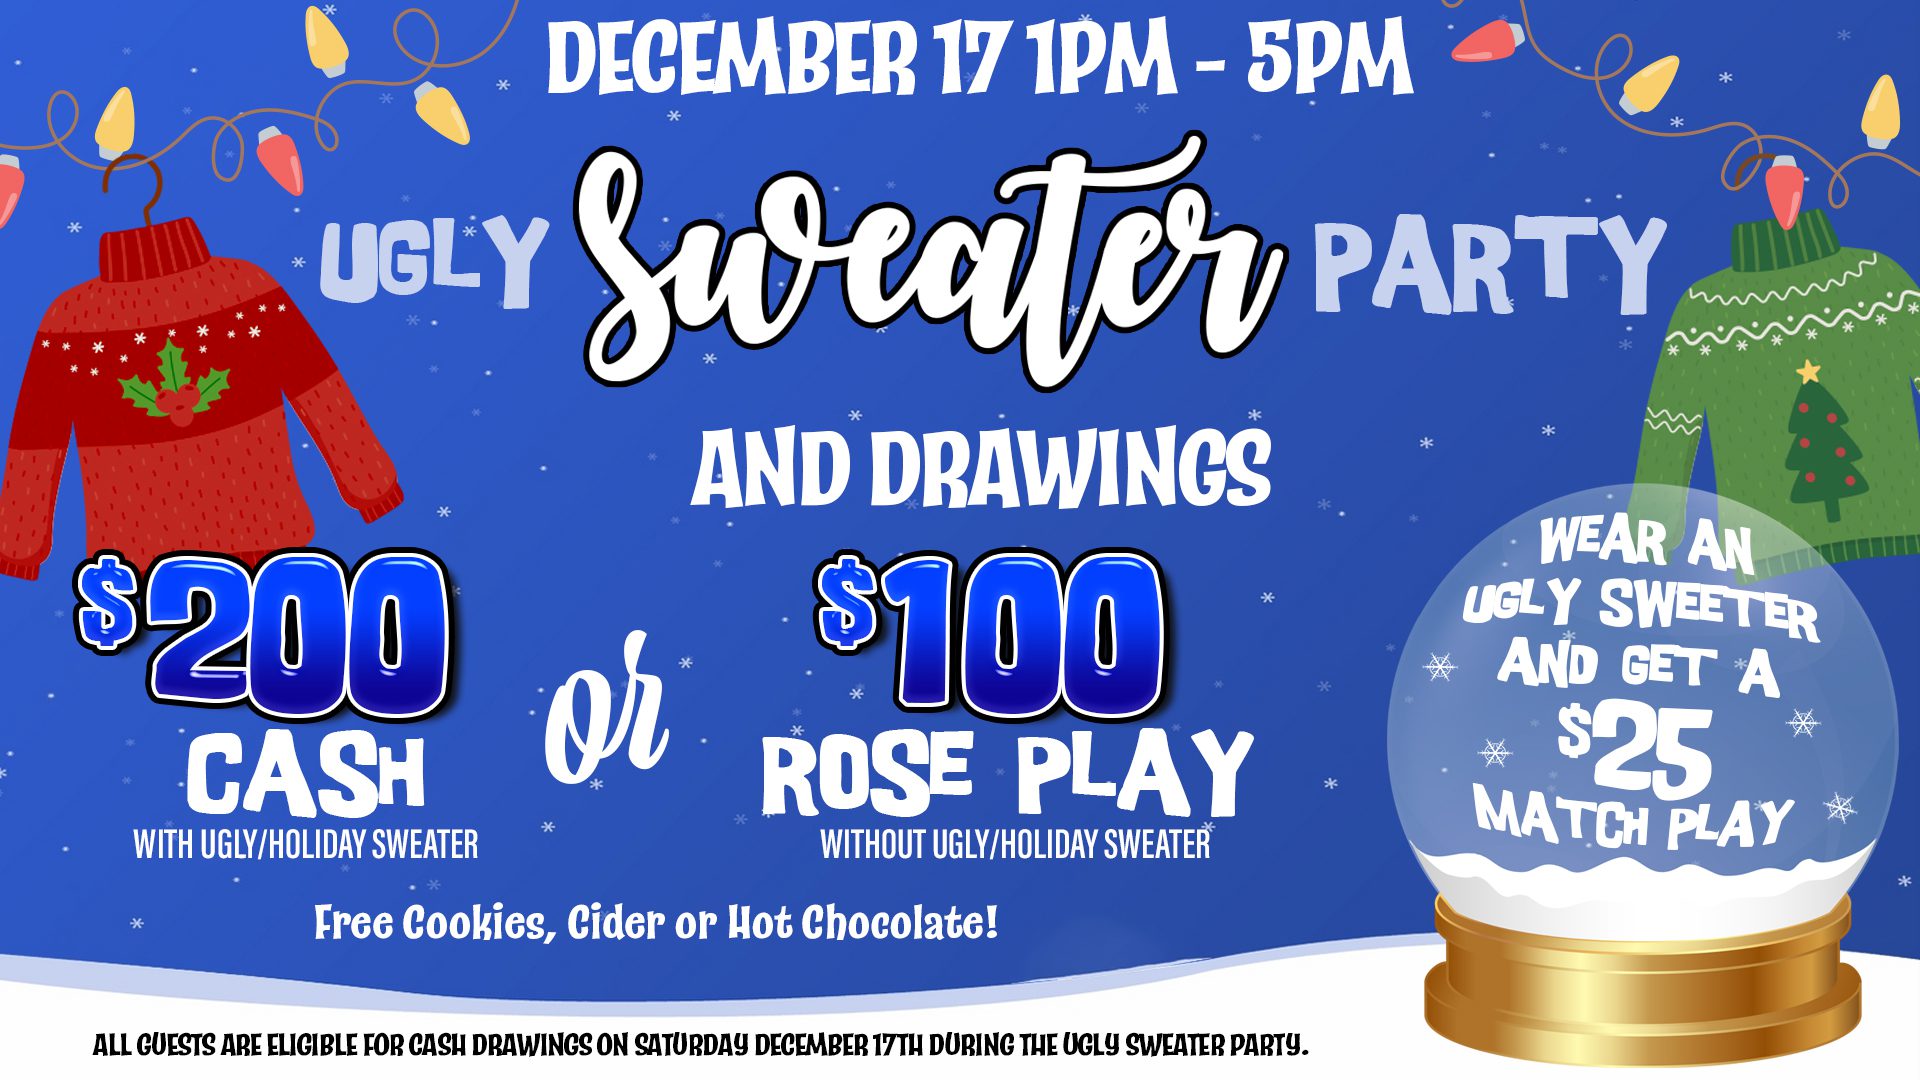 A poster for the holiday party and drawing.